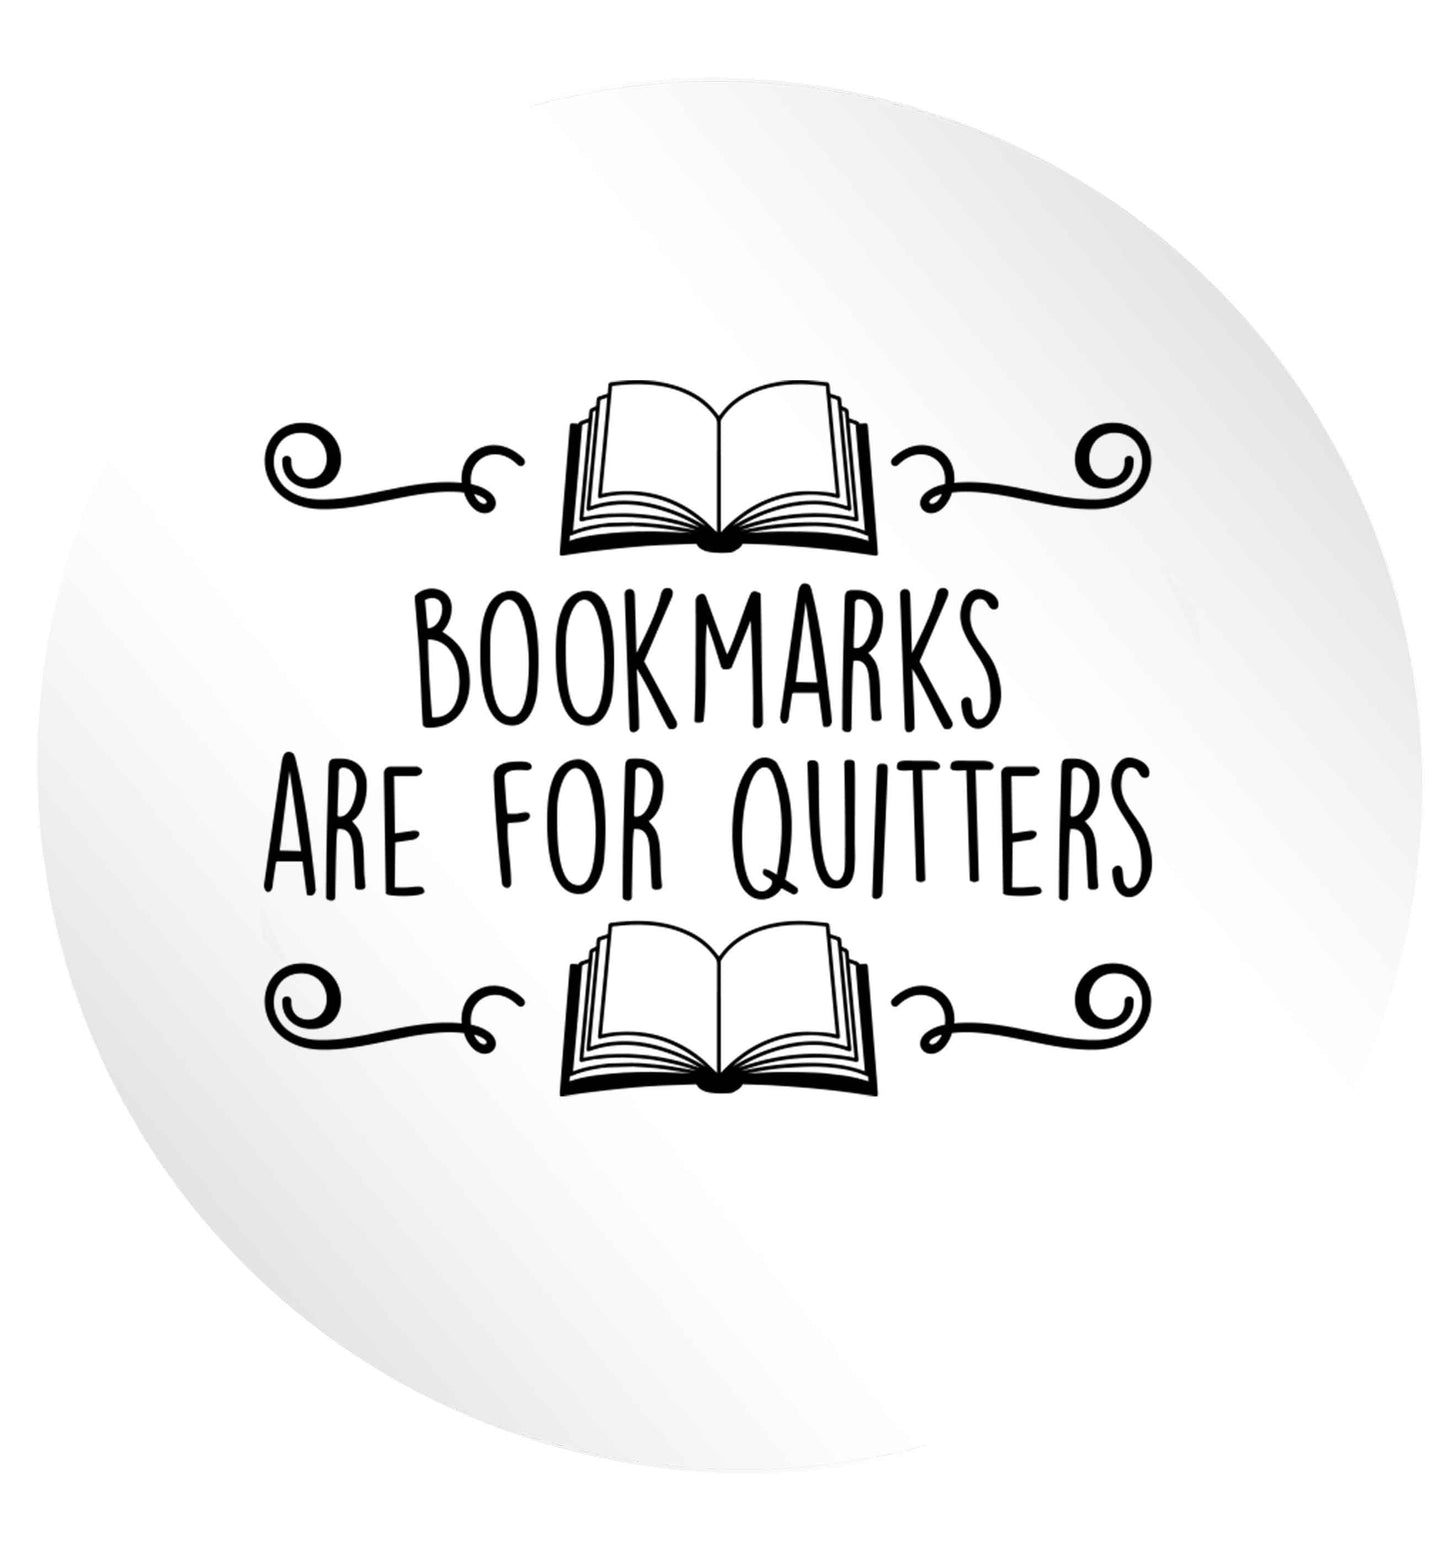 Bookmarks are for quitters 24 @ 45mm matt circle stickers